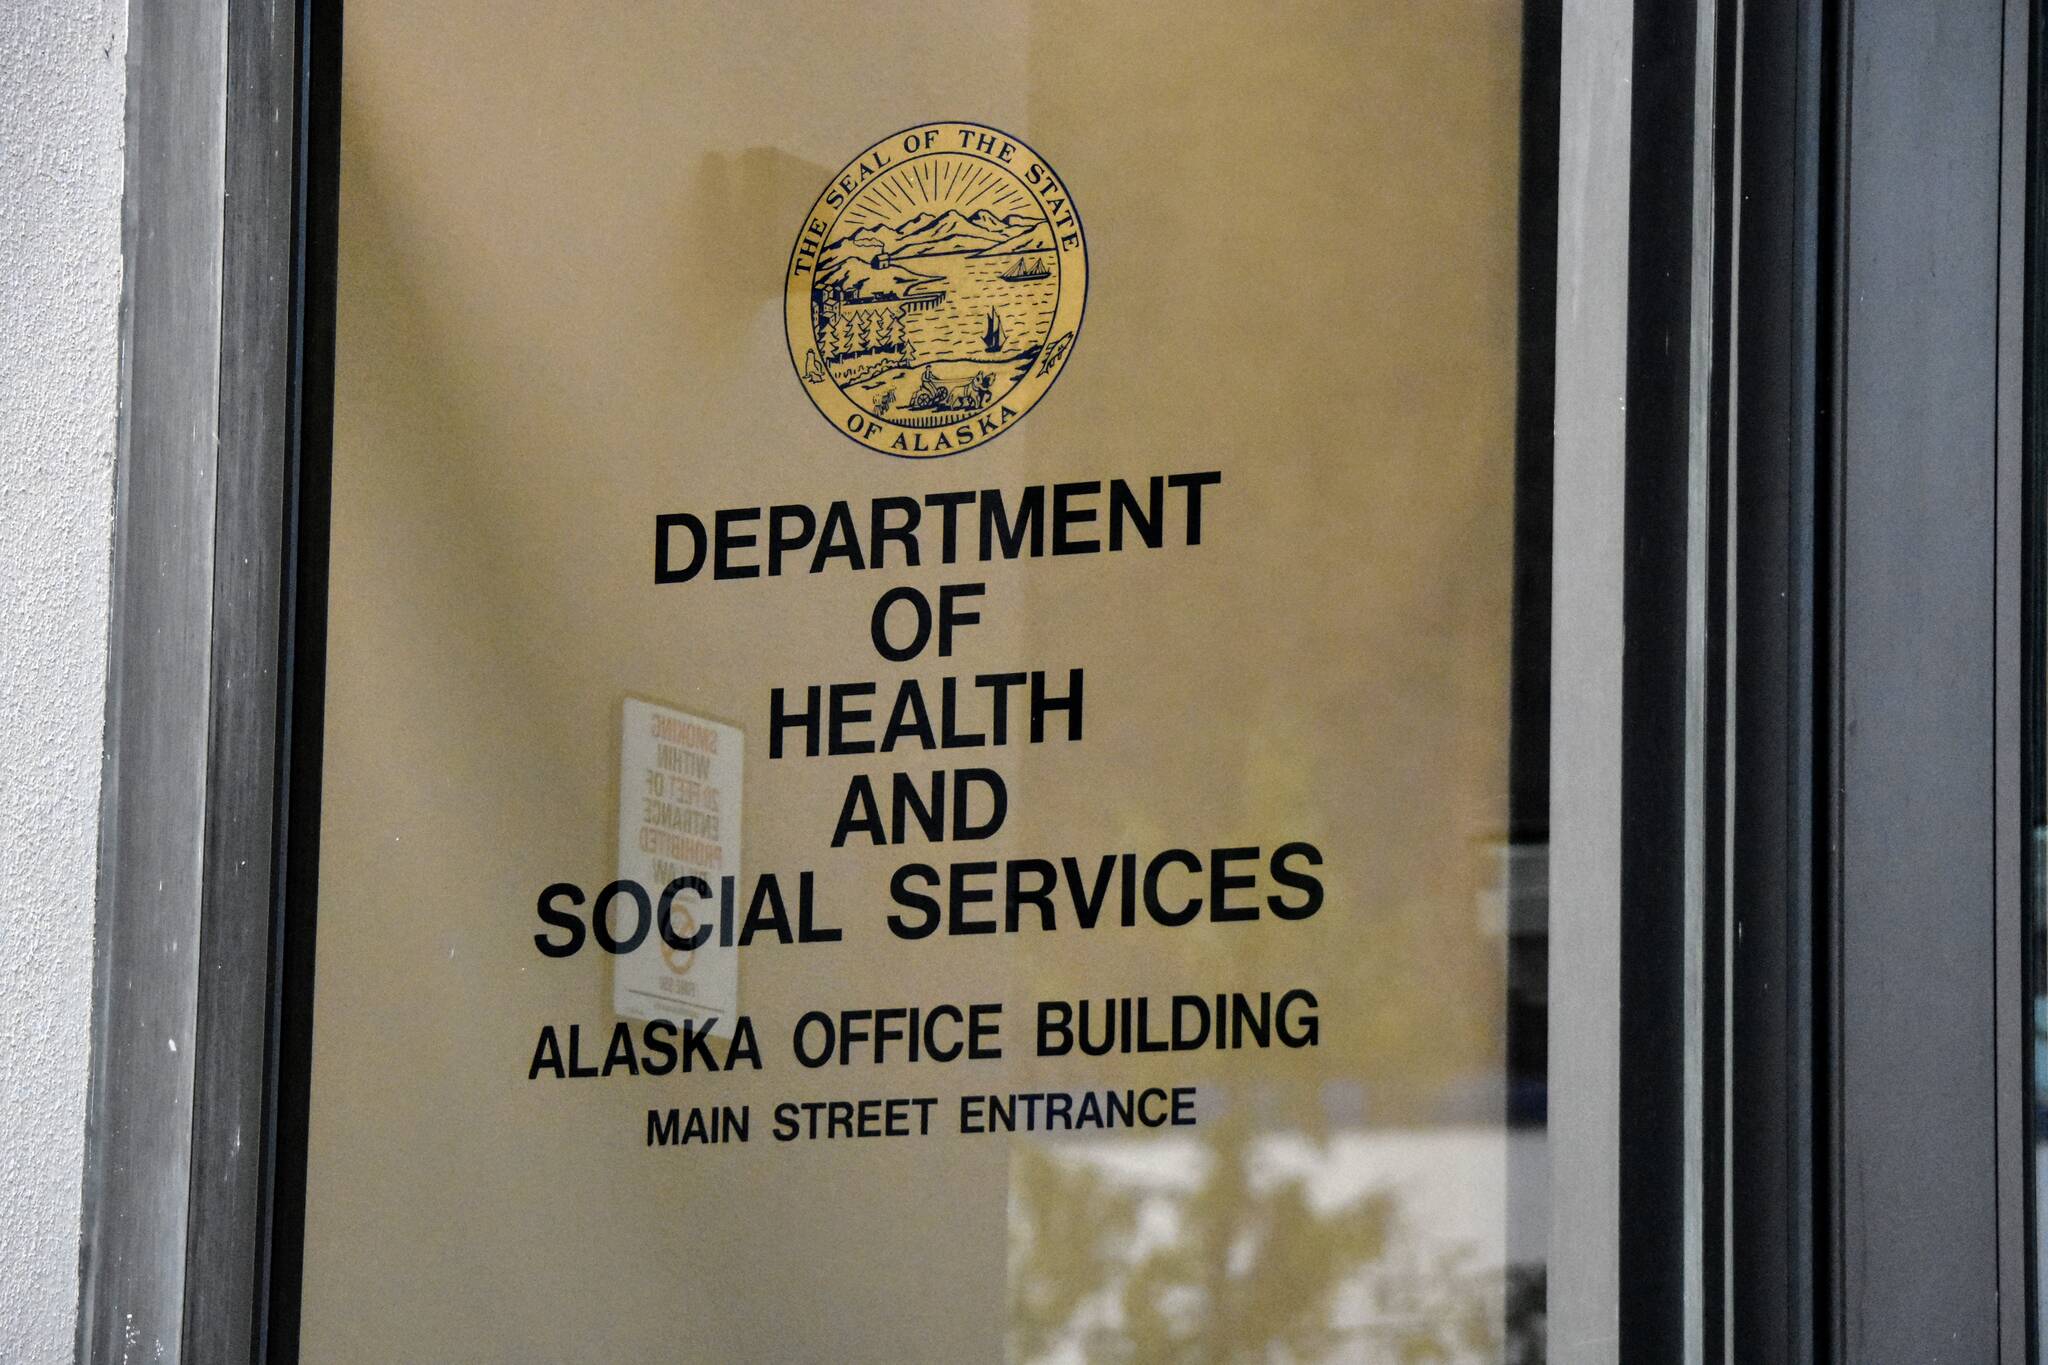 Peter Segall / Juneau Empire
Gov. Mike Dunleavy’s executive order to split the Department of Health and Social Services, its Juneau offices seen here on Monday into two new departments became law over the weekend, but the split won’t go into effect until July.